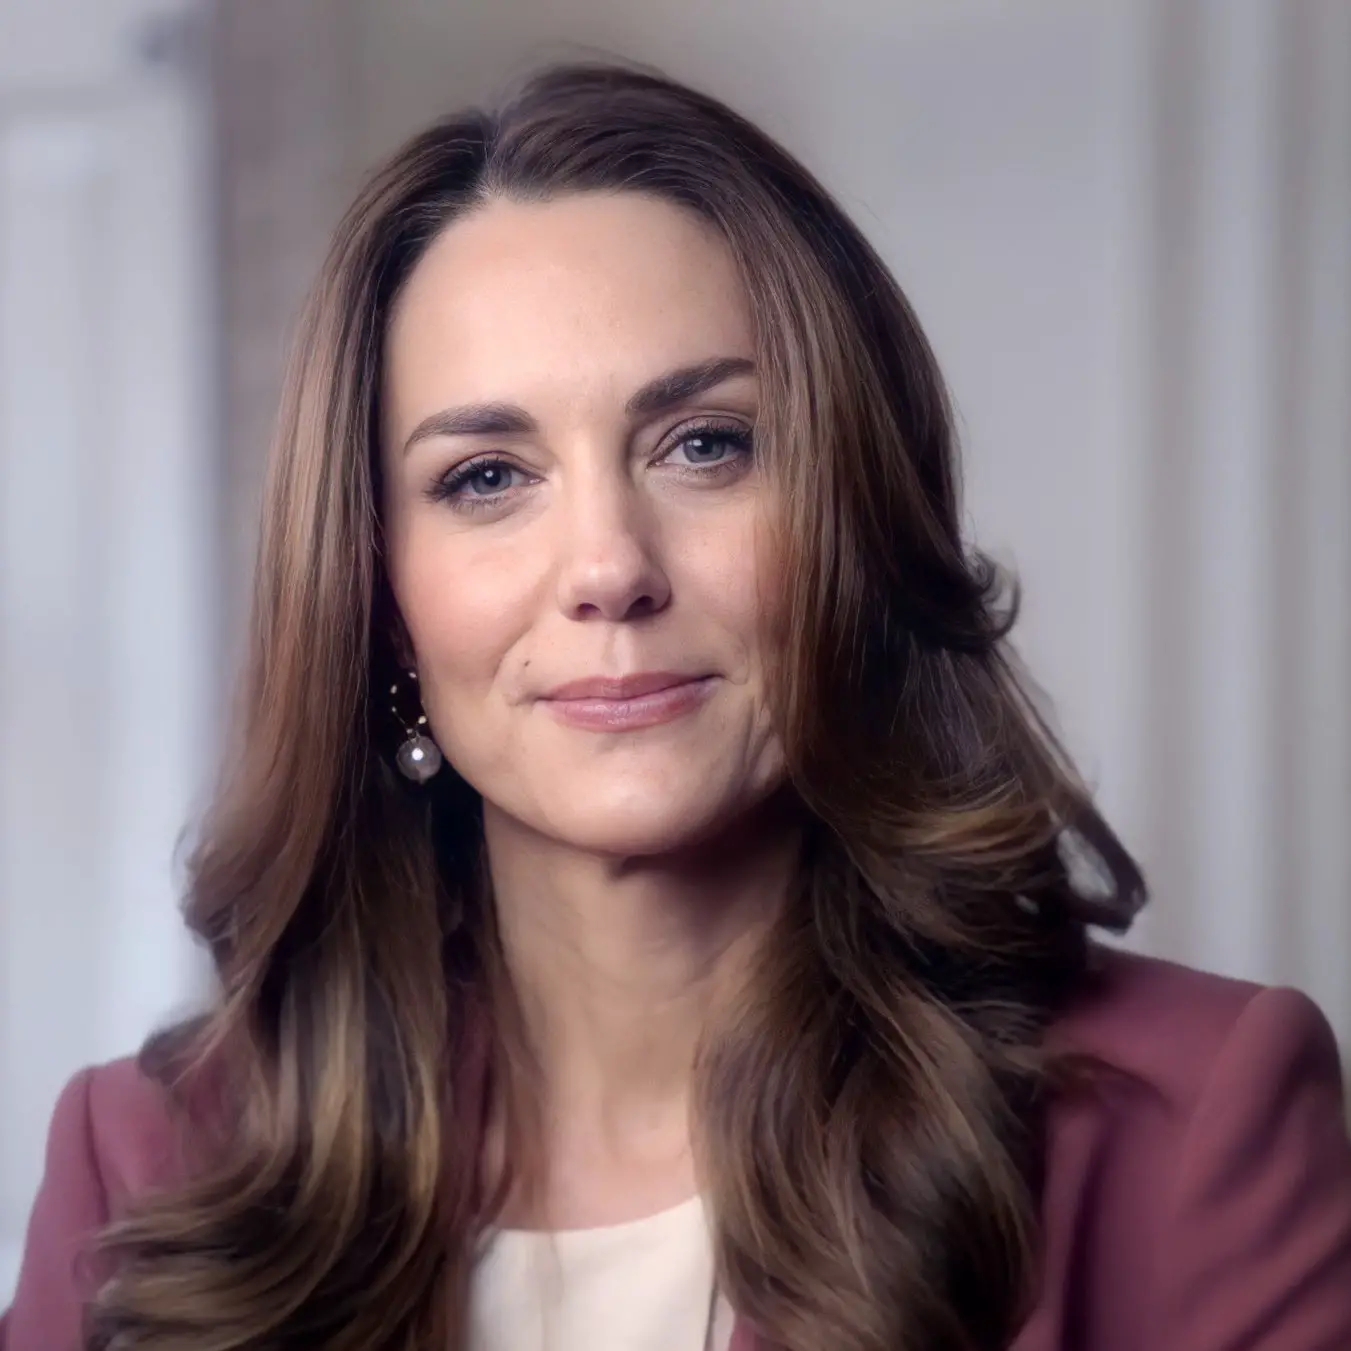 The Duchess of cambridge wore Marks and Spencer sweater for Early Years forum keynote speech